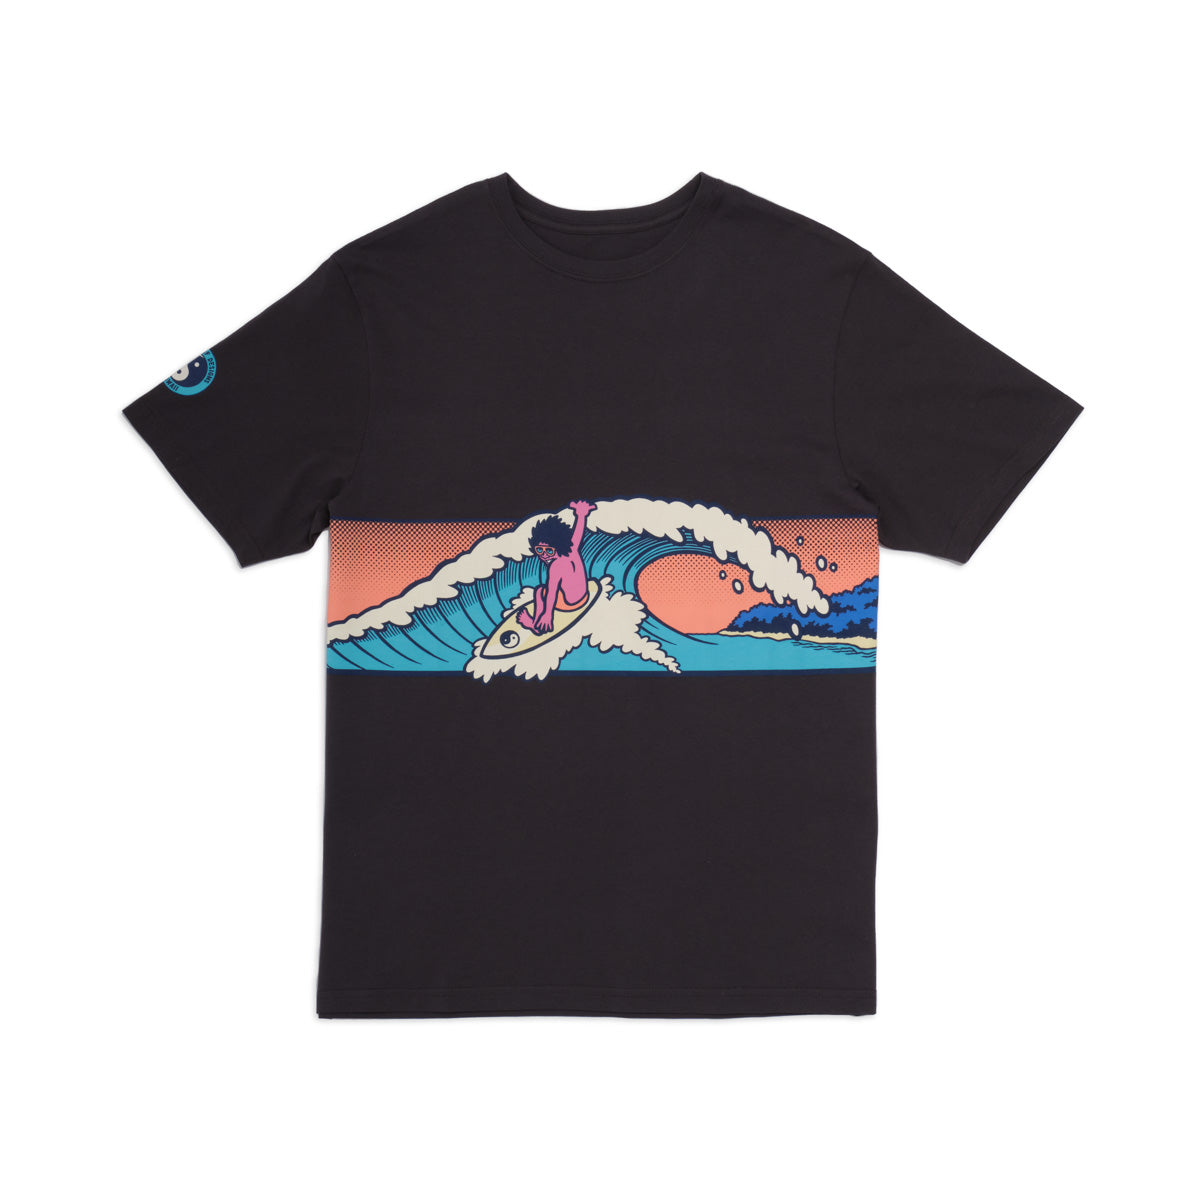 L. Turn S/S Tee - Washed Black